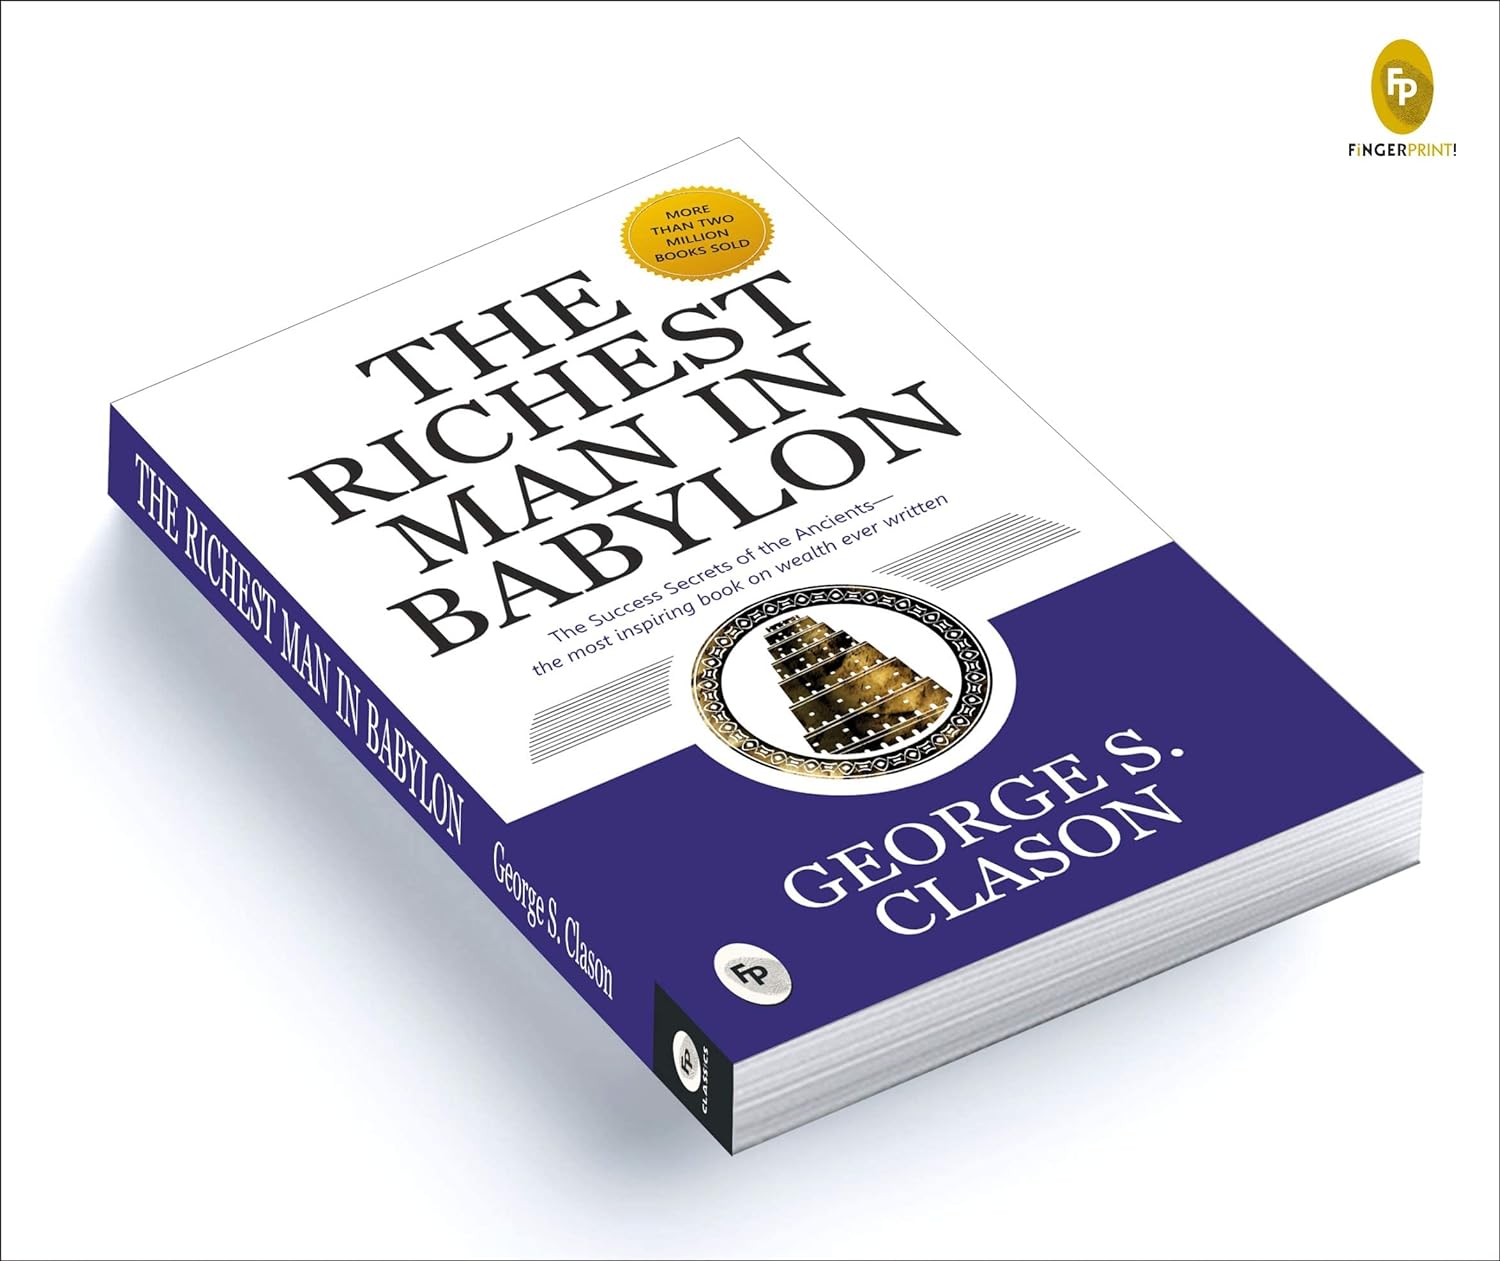 The Richest Man In Babylon By George S. Clason